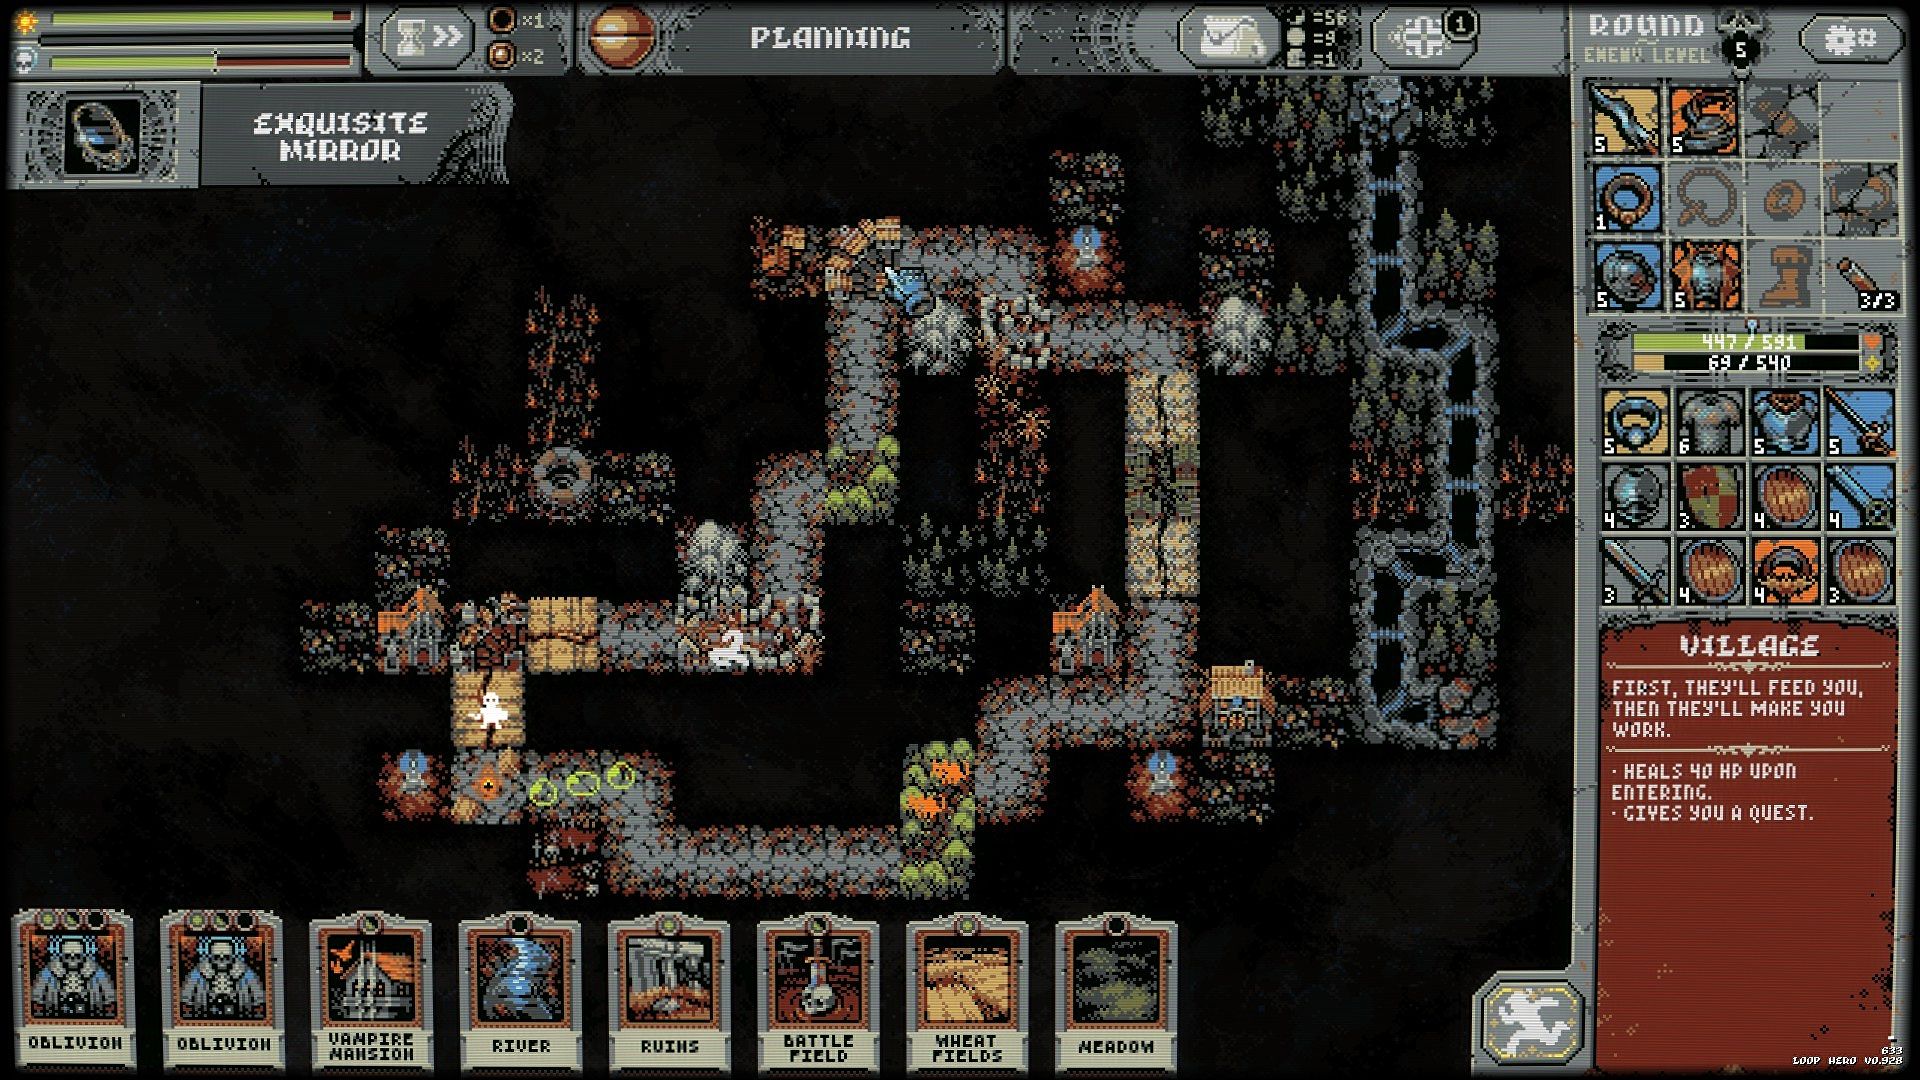 Screenshot from Loop Hero. A top-down pixel art map showing forests, rivers, and monsters, with a sidebar showing the character